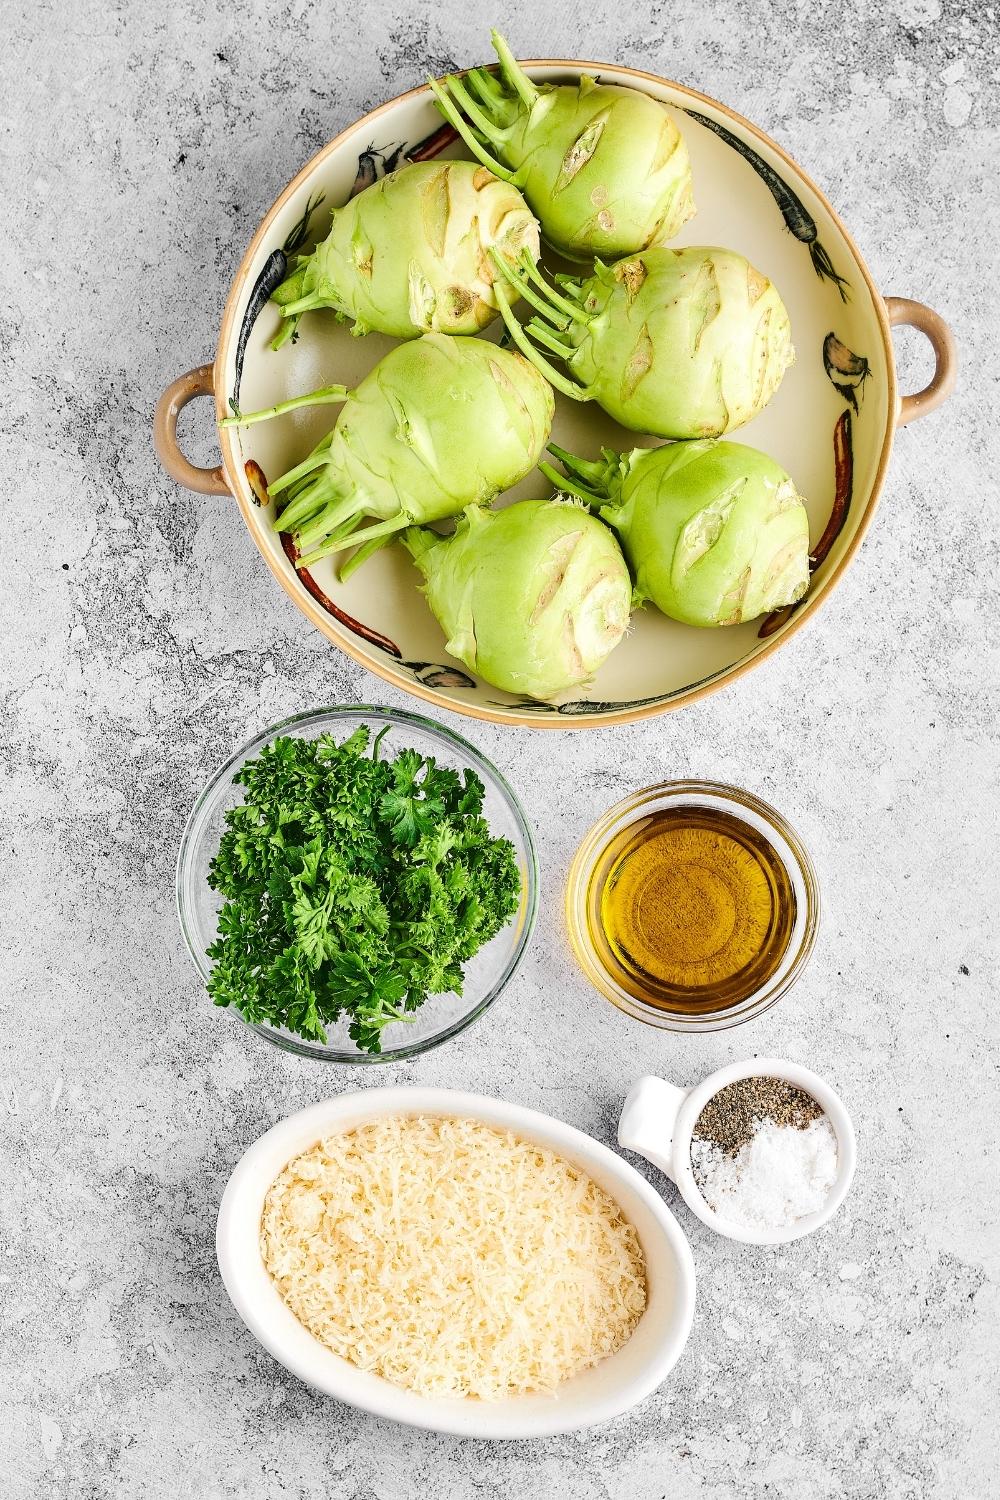 A bowl with kohlrabi in it, parlsey in a bowl, oil in a bowl, salt and pepper in a bowl, and grated parmesan in a bowl.